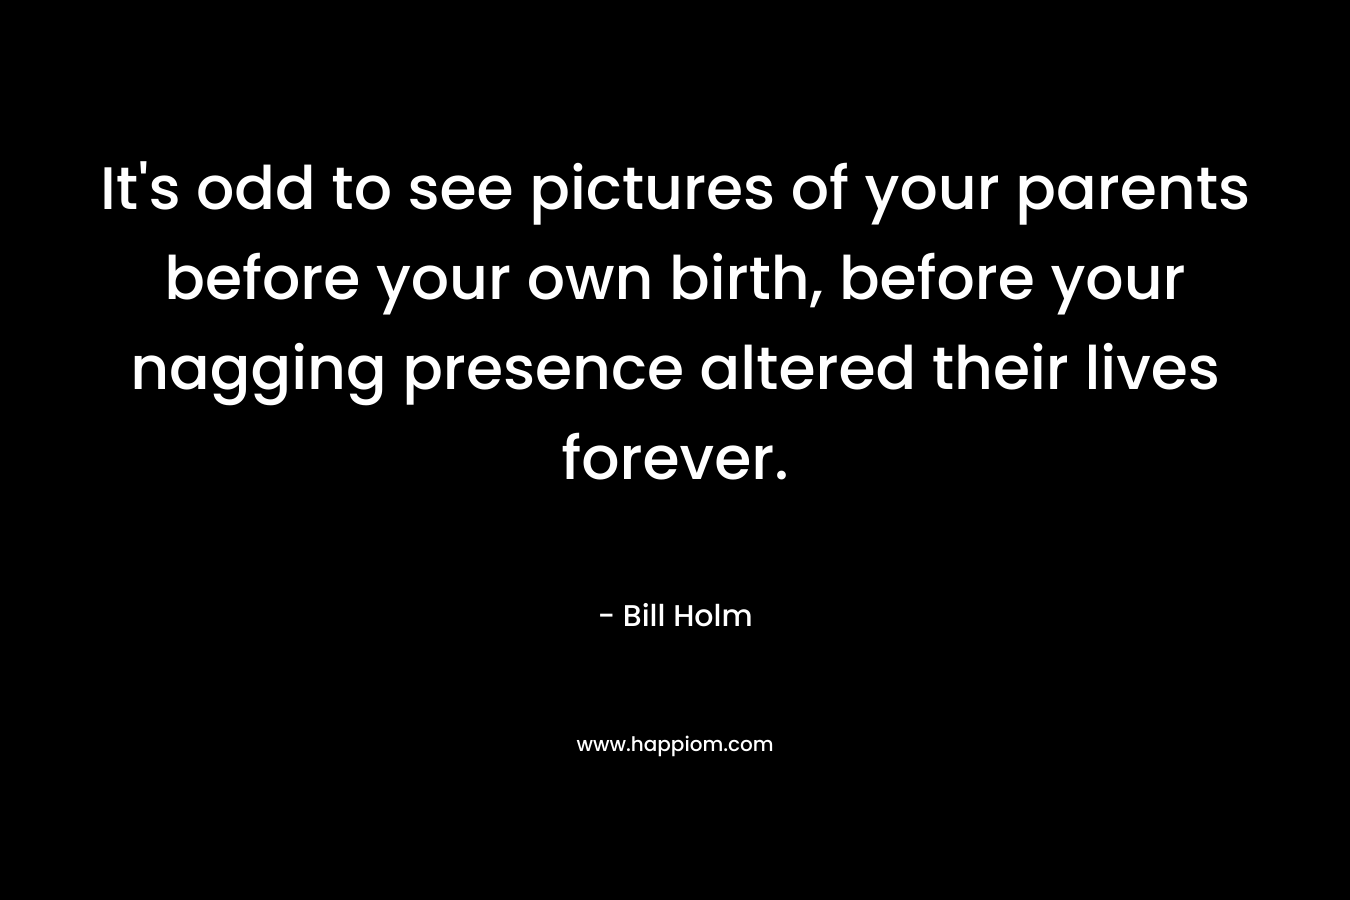 It’s odd to see pictures of your parents before your own birth, before your nagging presence altered their lives forever. – Bill Holm